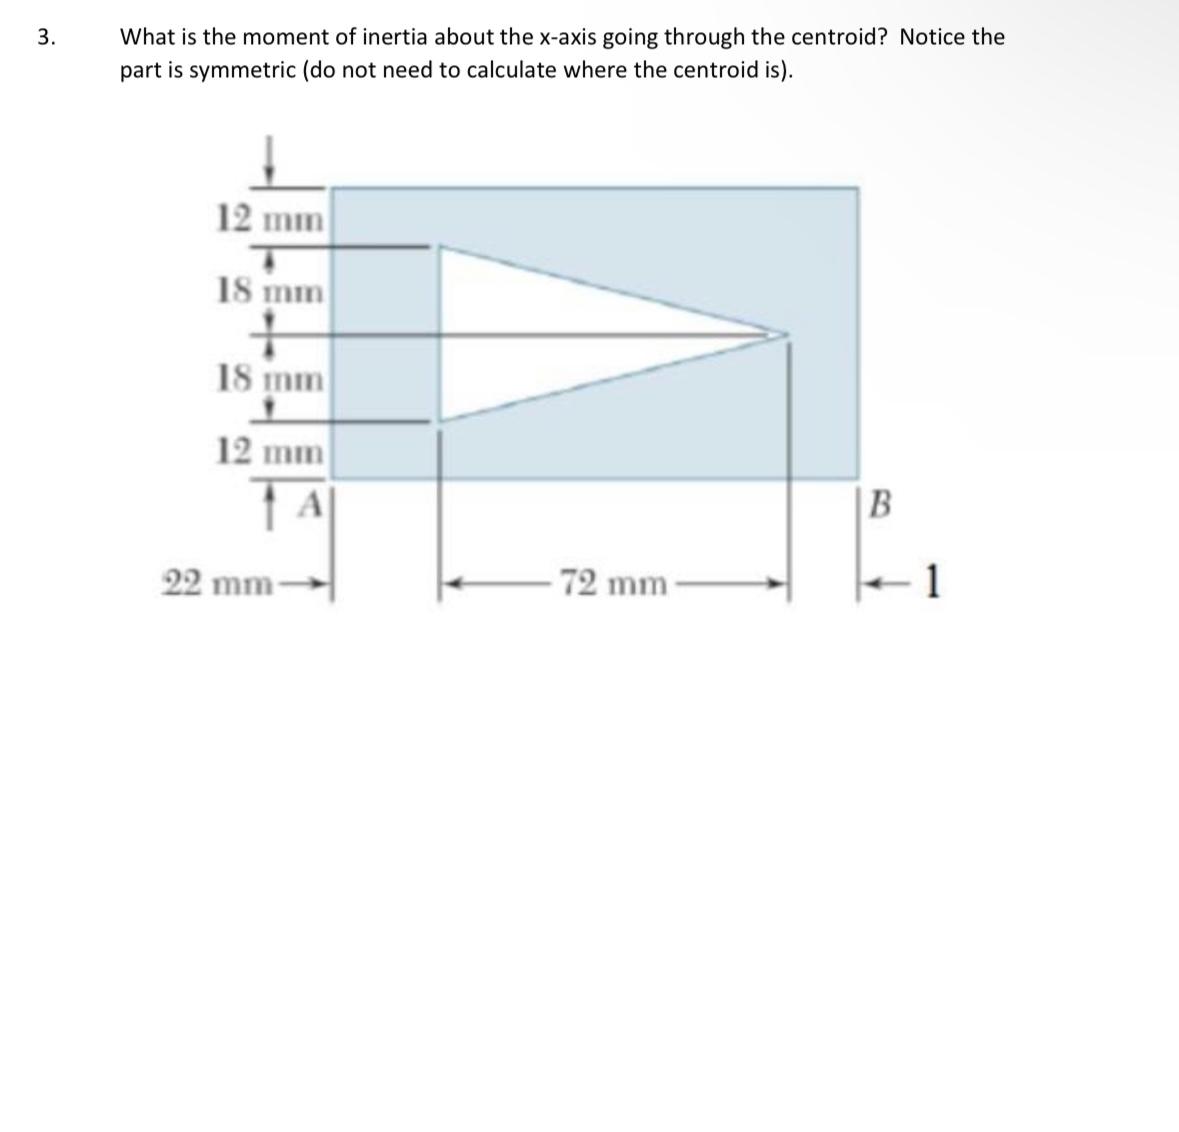 3. What is the moment of inertia about the x-axis going through the centroid? Notice the part is symmetric